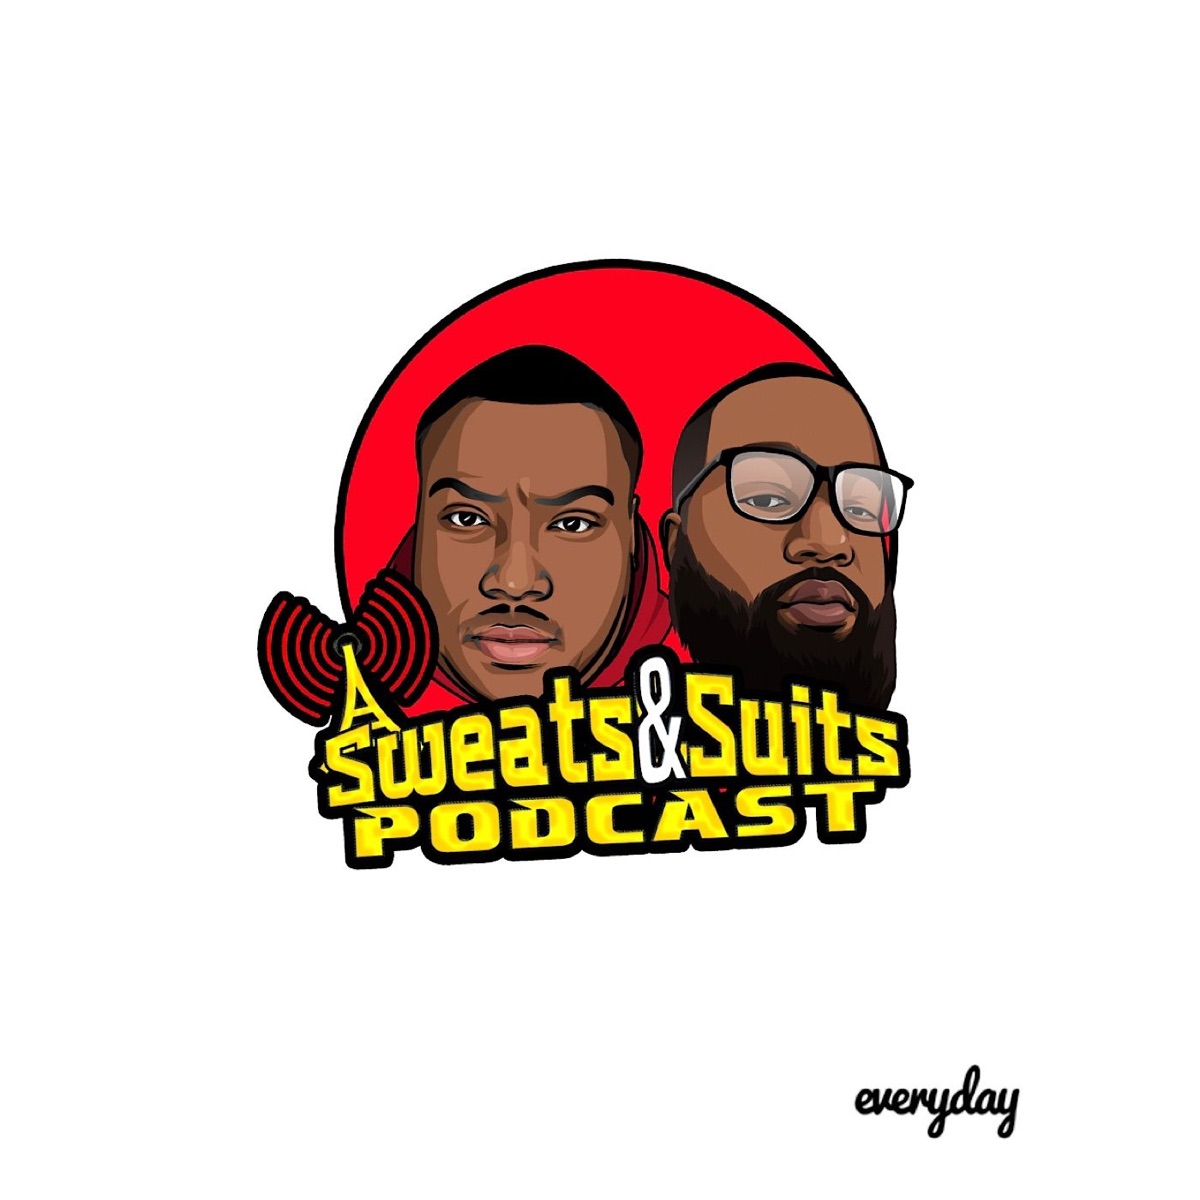 Sweats & Suits Podcast – Podcast – Podtail